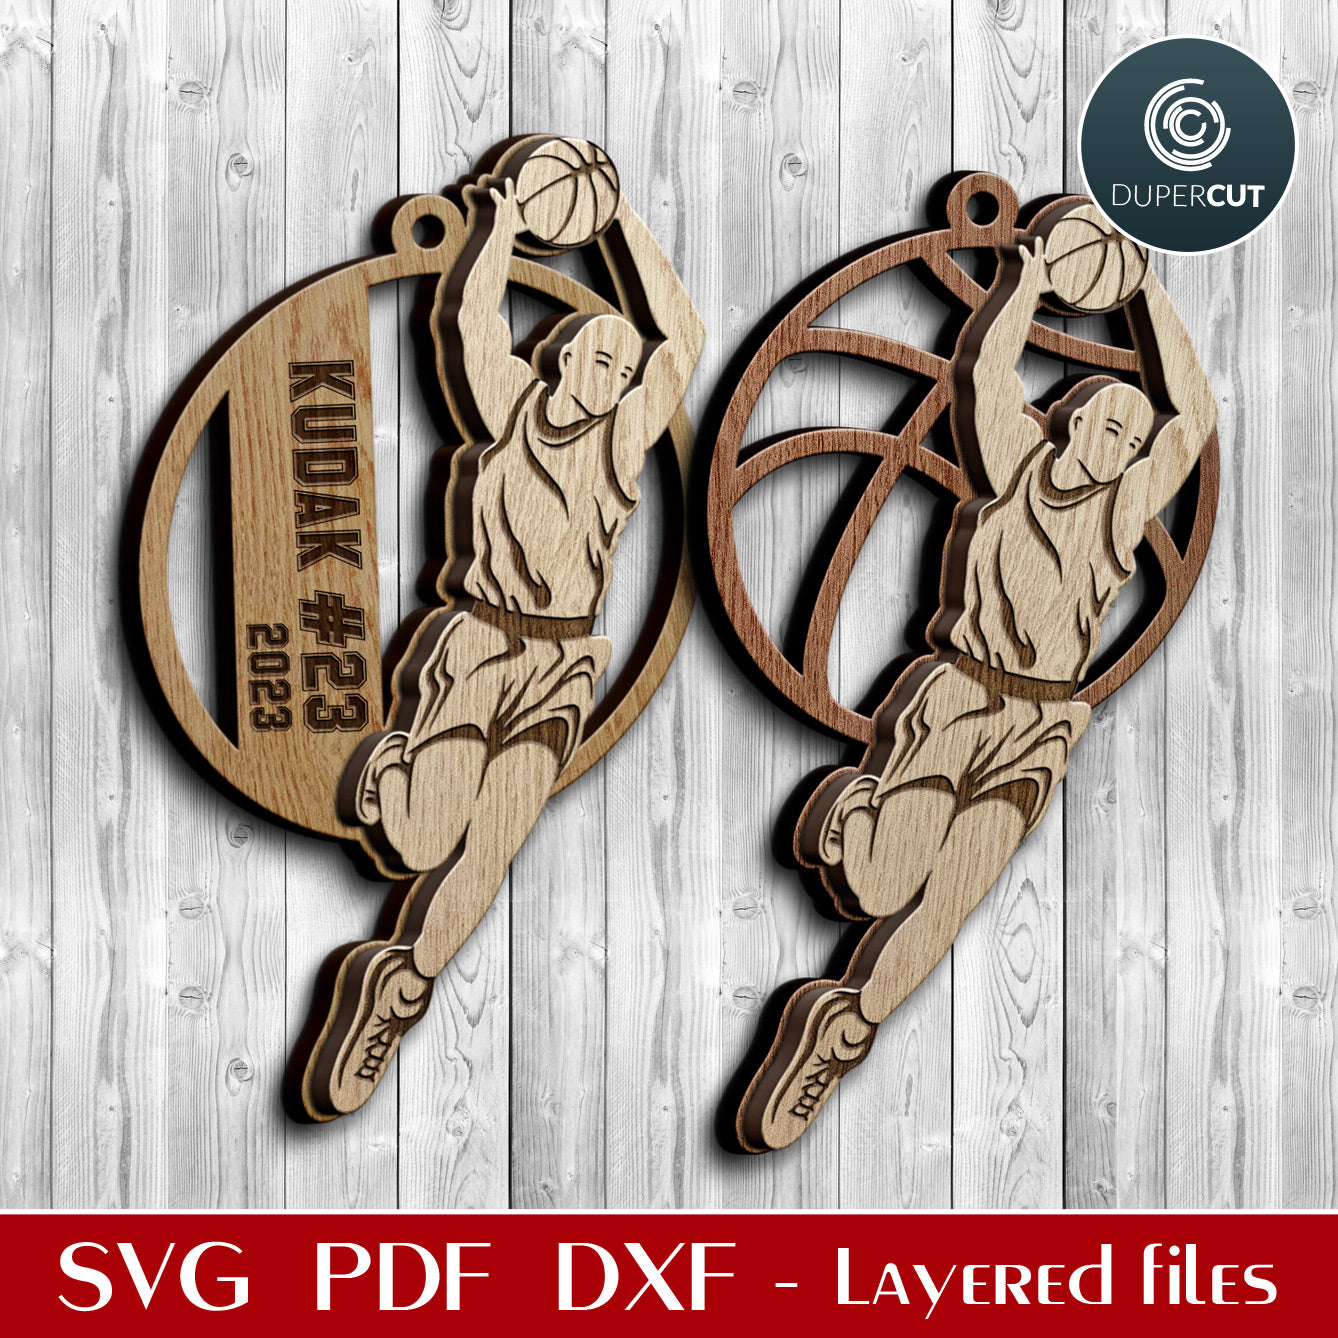 Basketball player ornaments layered cut files template, Christmas tree decoration SVG files for Glowforge, Xtool, CNC laser machines, Cricut, by www.DuperCut.com